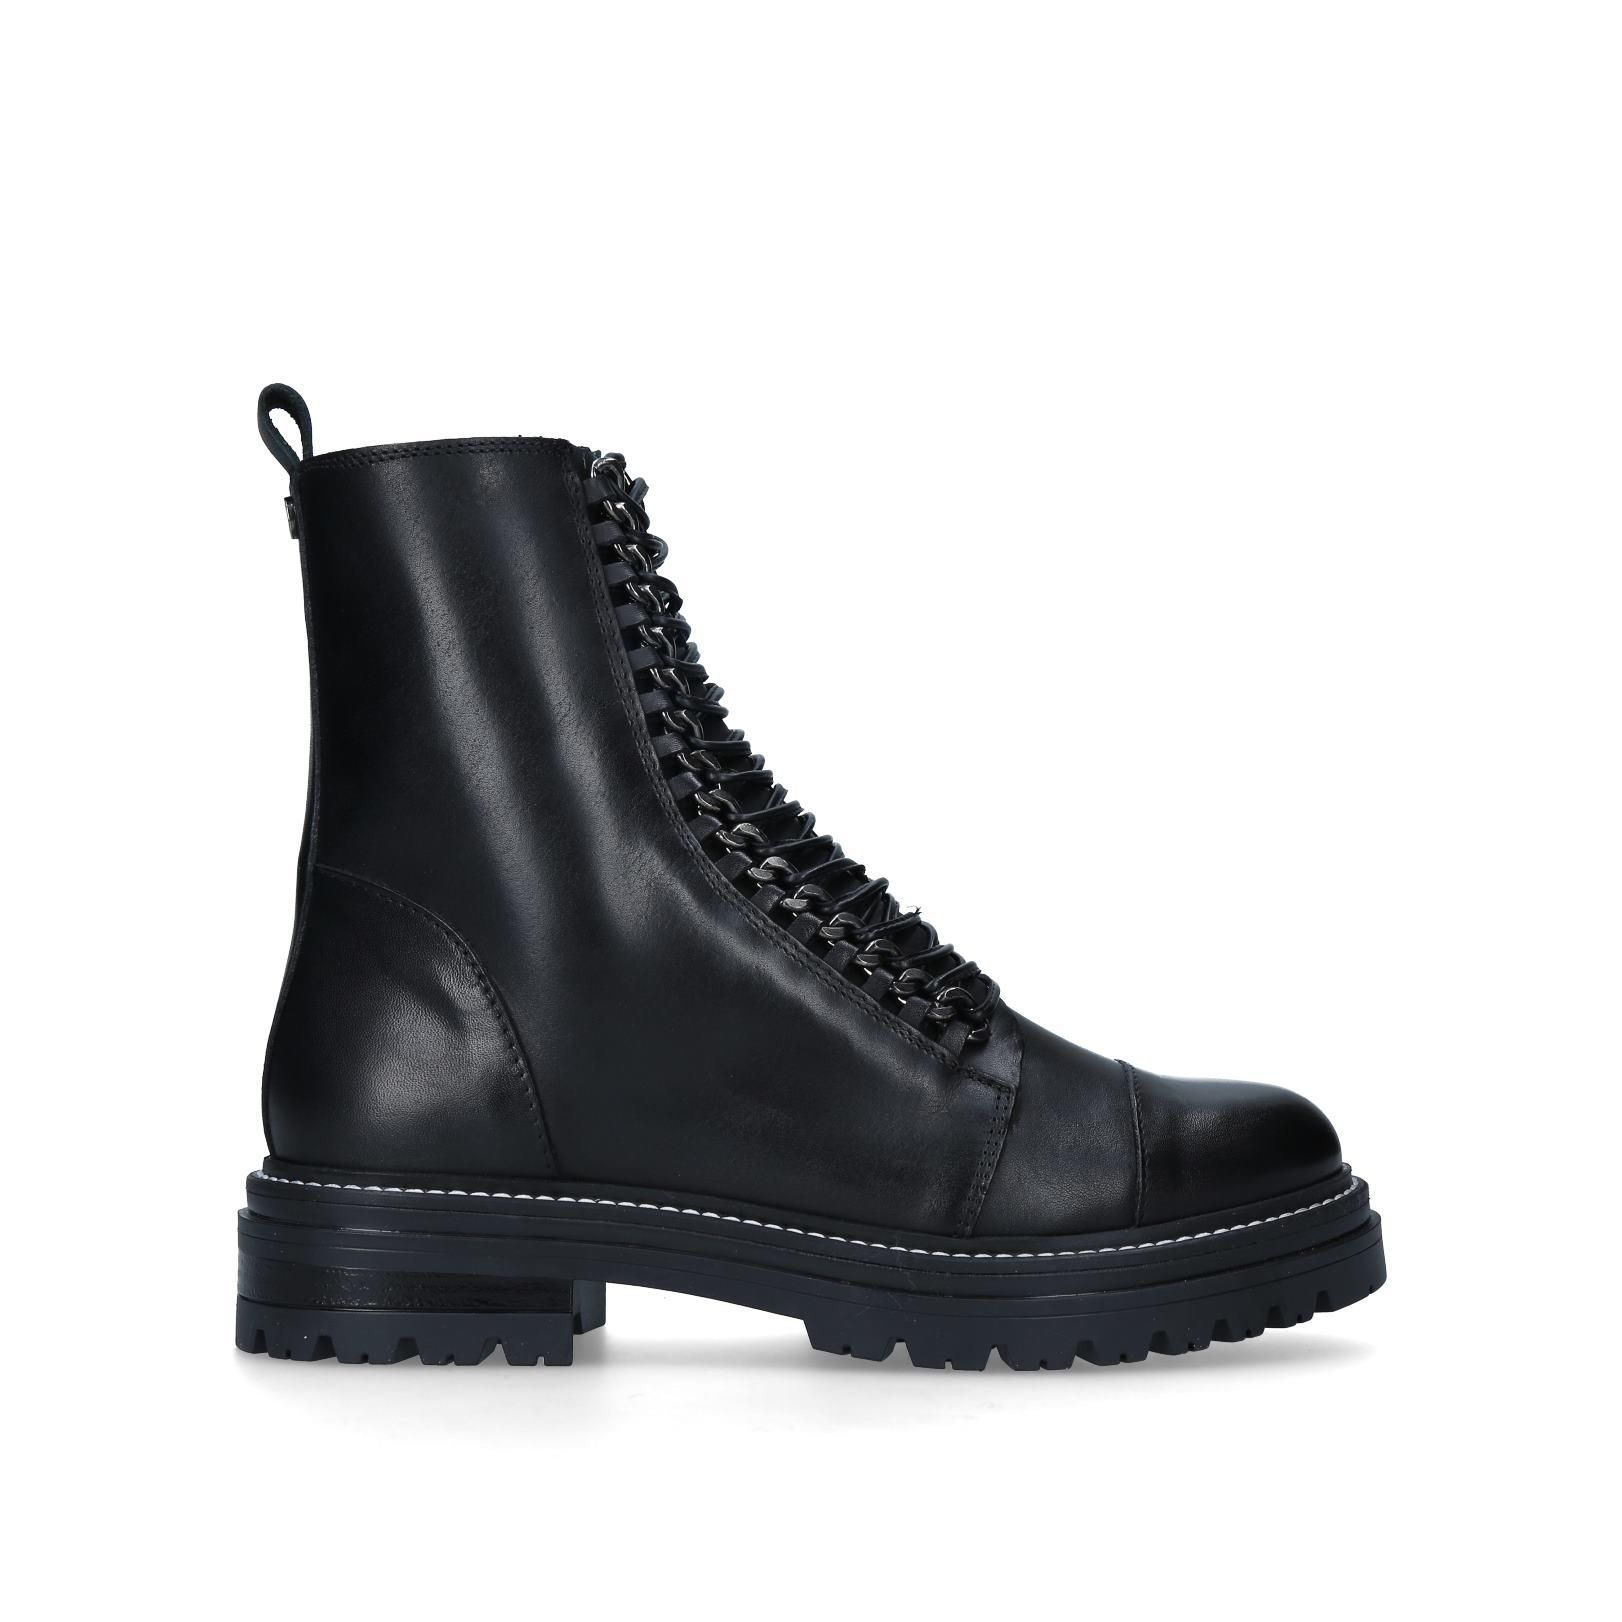 SULTRY CHAIN Black Leather Combat Boots by CARVELA | Kurt Geiger (Global)